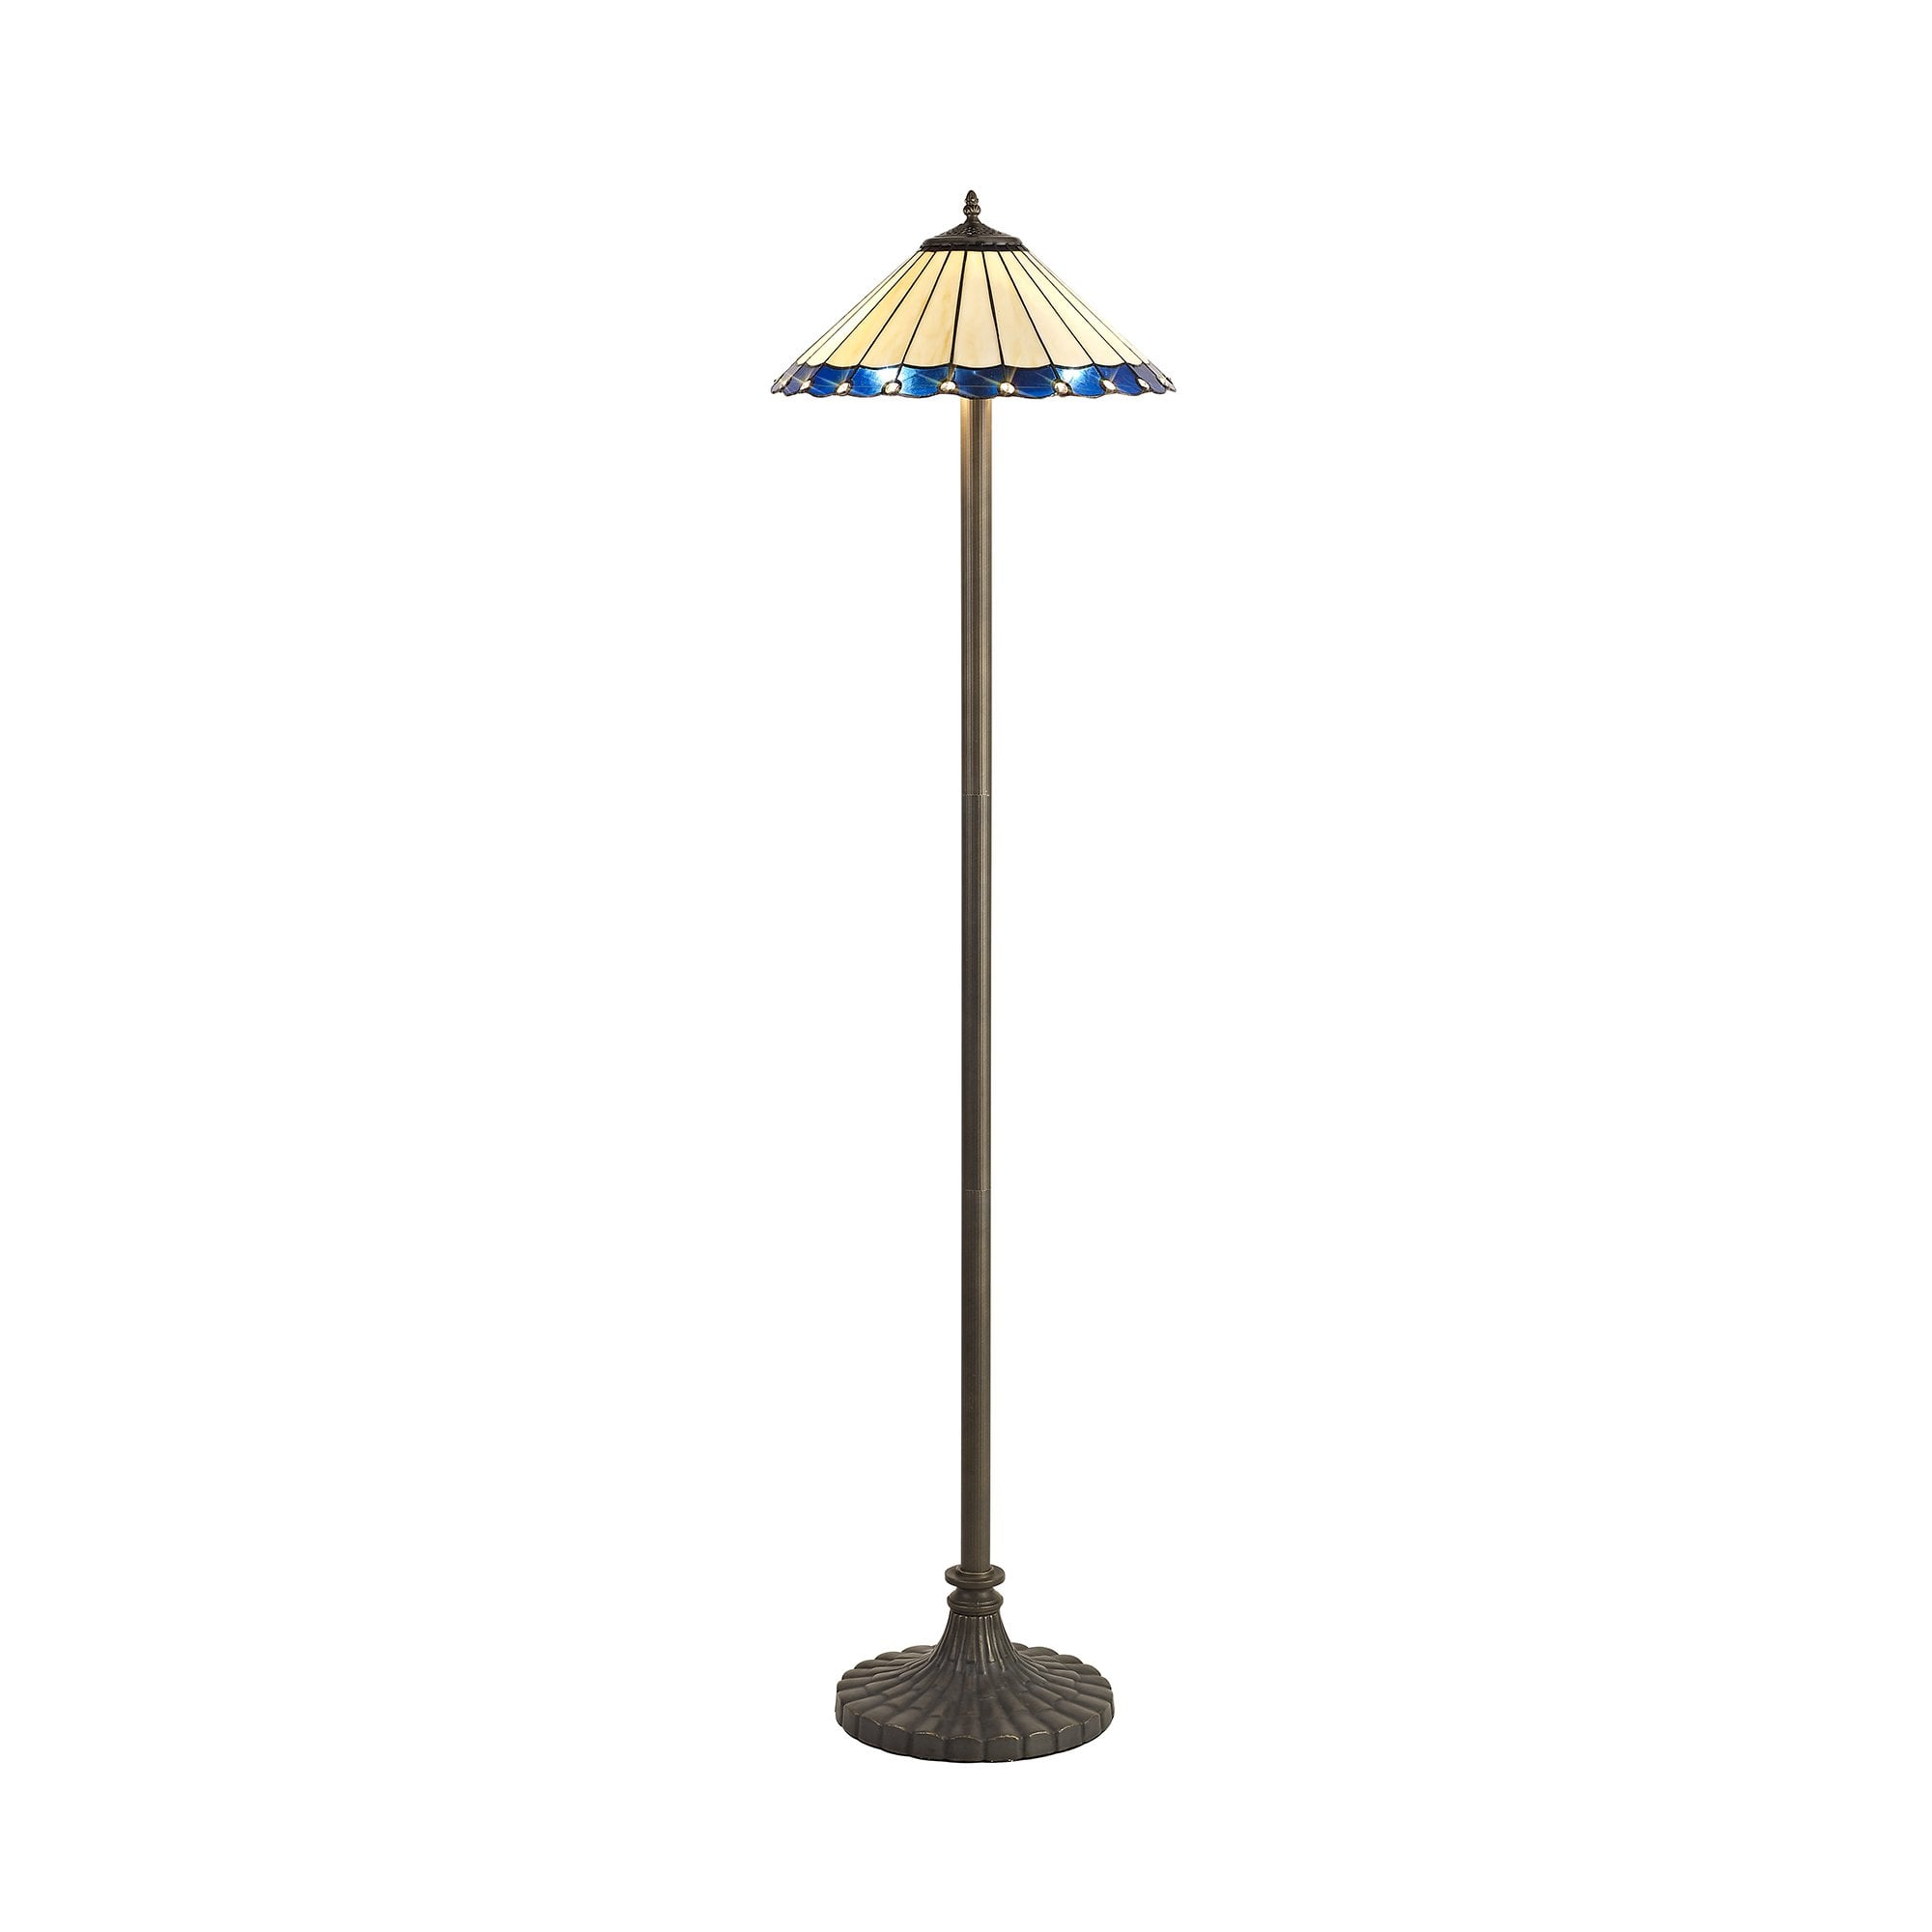 2 Light Stepped Design Floor Lamp E27 With 40cm Tiffany Shade, Blue/Cream/Crystal/Aged Antique Brass